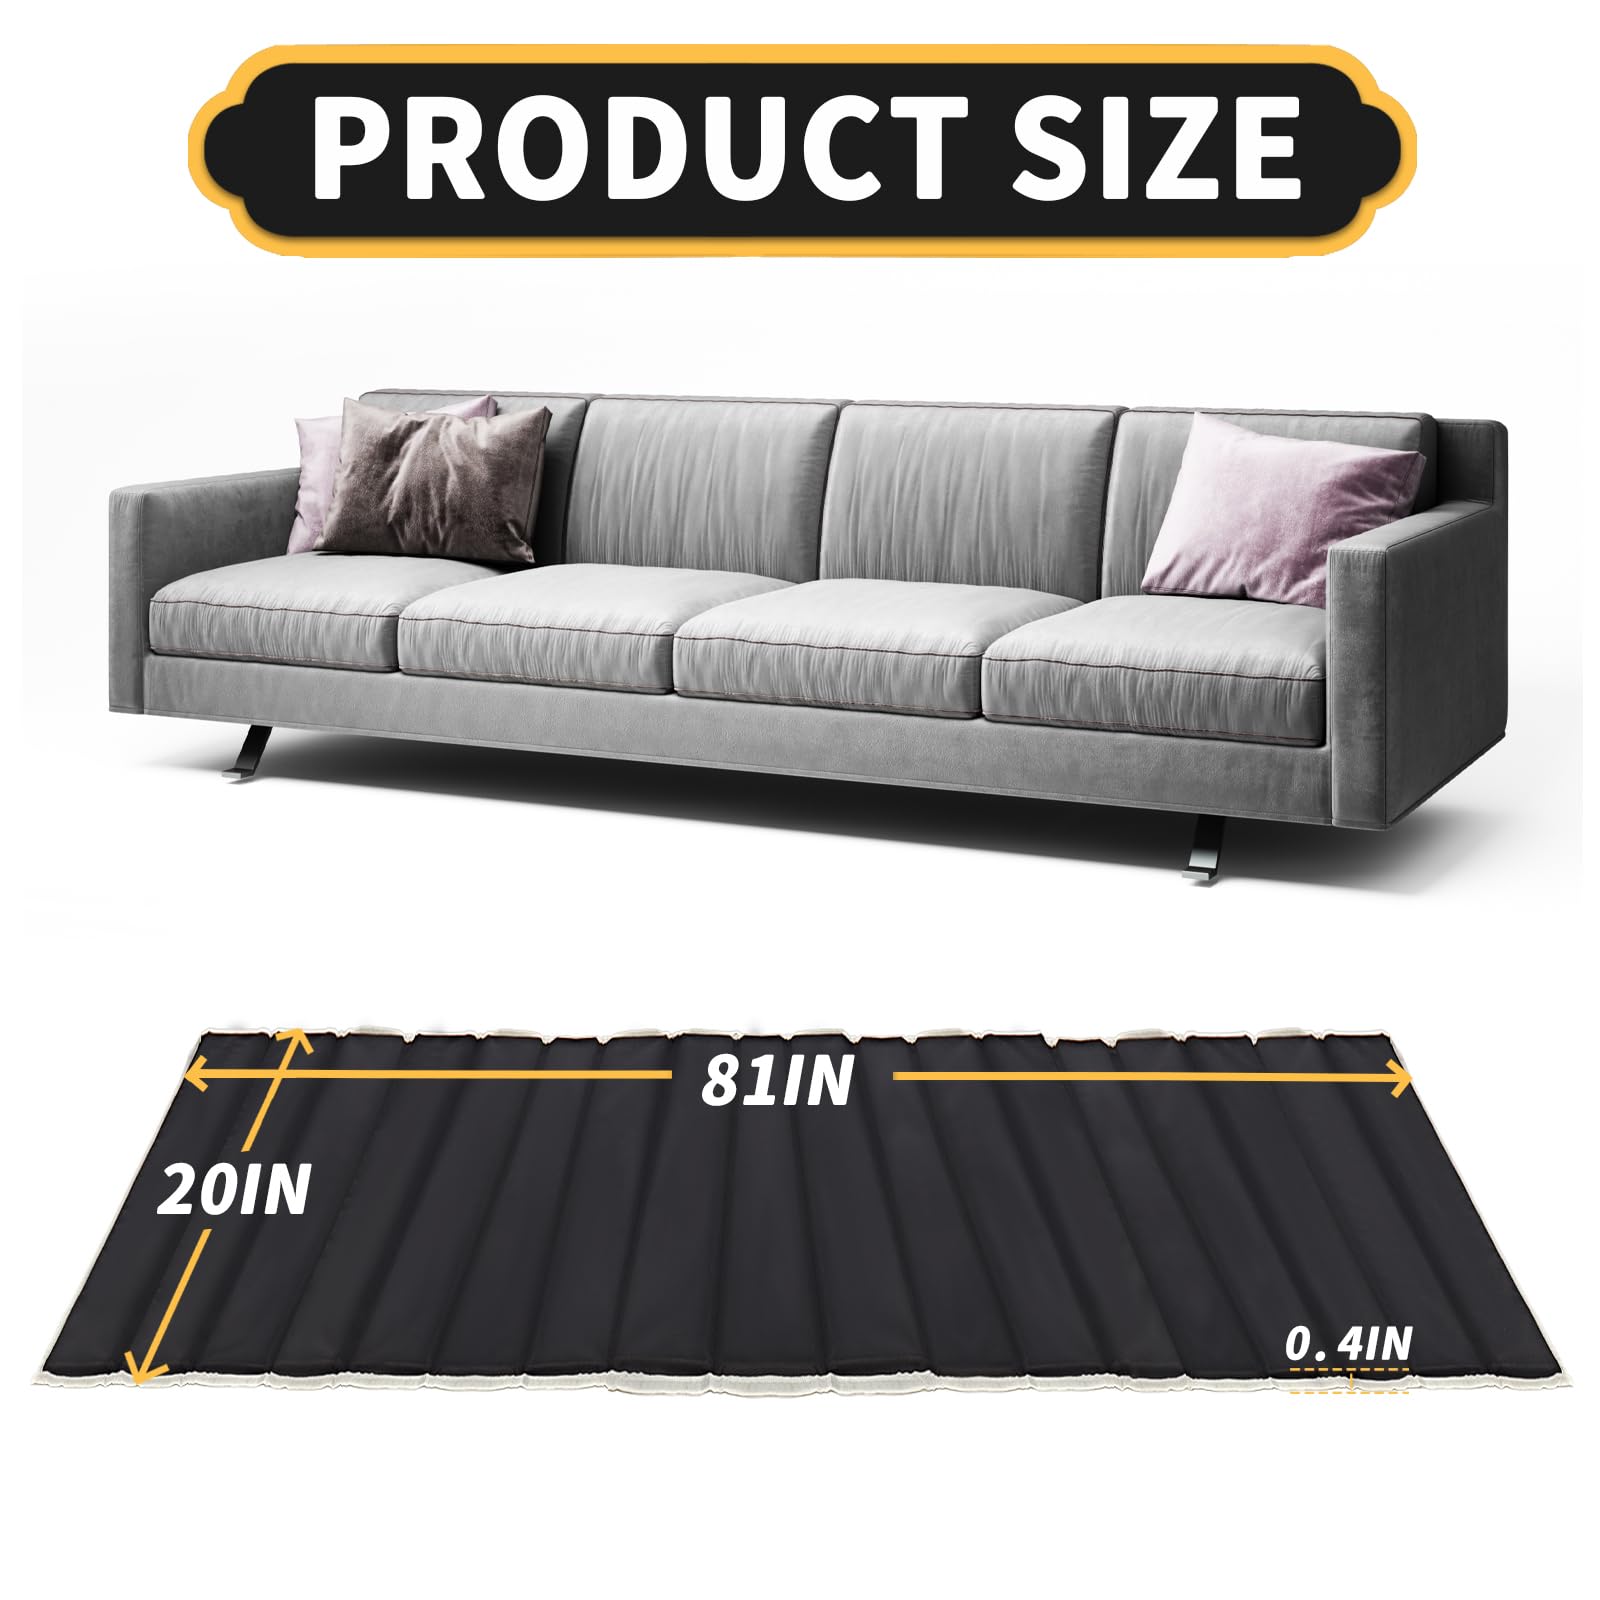 SDLDEER Couch Cushion Support, 20" x 81" Heavy Duty Couch Supports for Sagging Cushions, Solid Wood Sofa Cushion Support Ideal Solution to Protect Sagging Couch Support Cushion (Black)